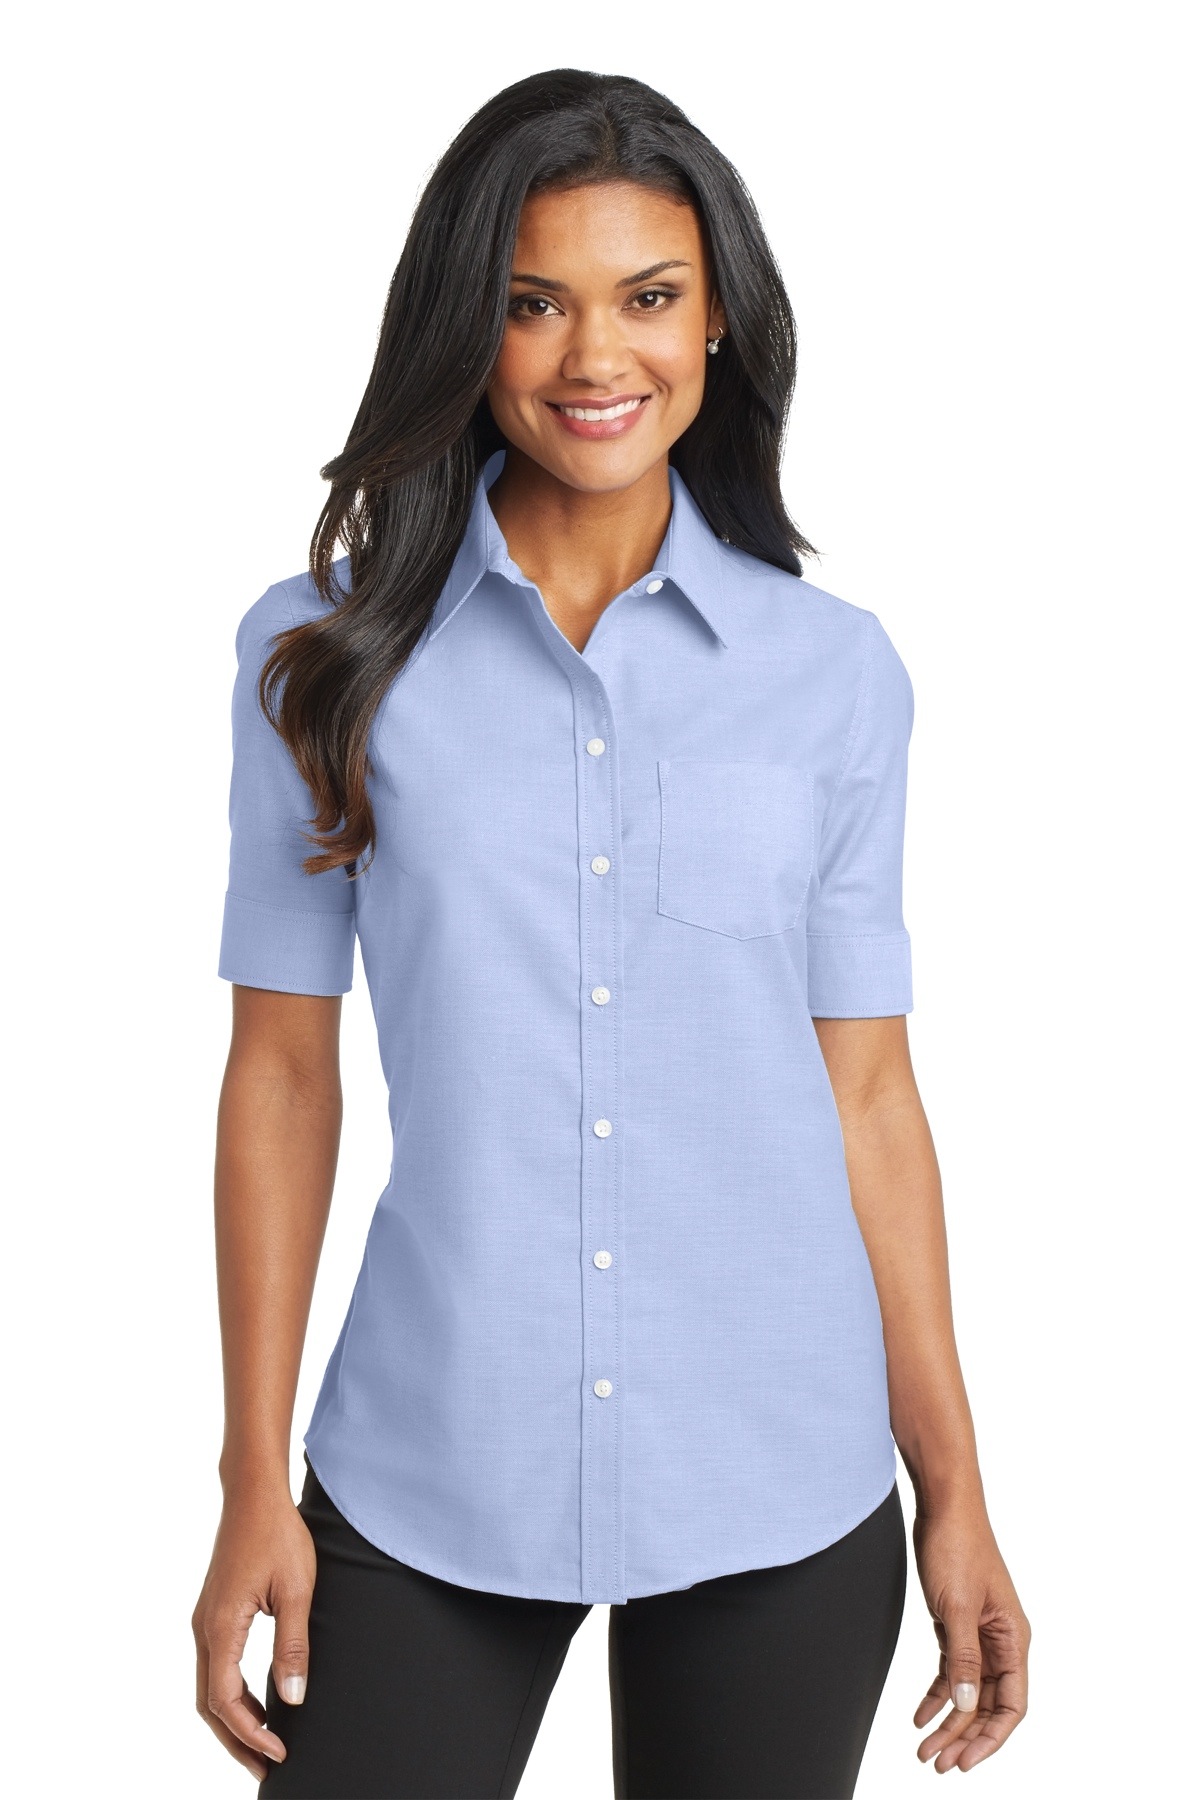 Embroidered L659 Port Authority Ladies Short Sleeve SuperPro Oxford